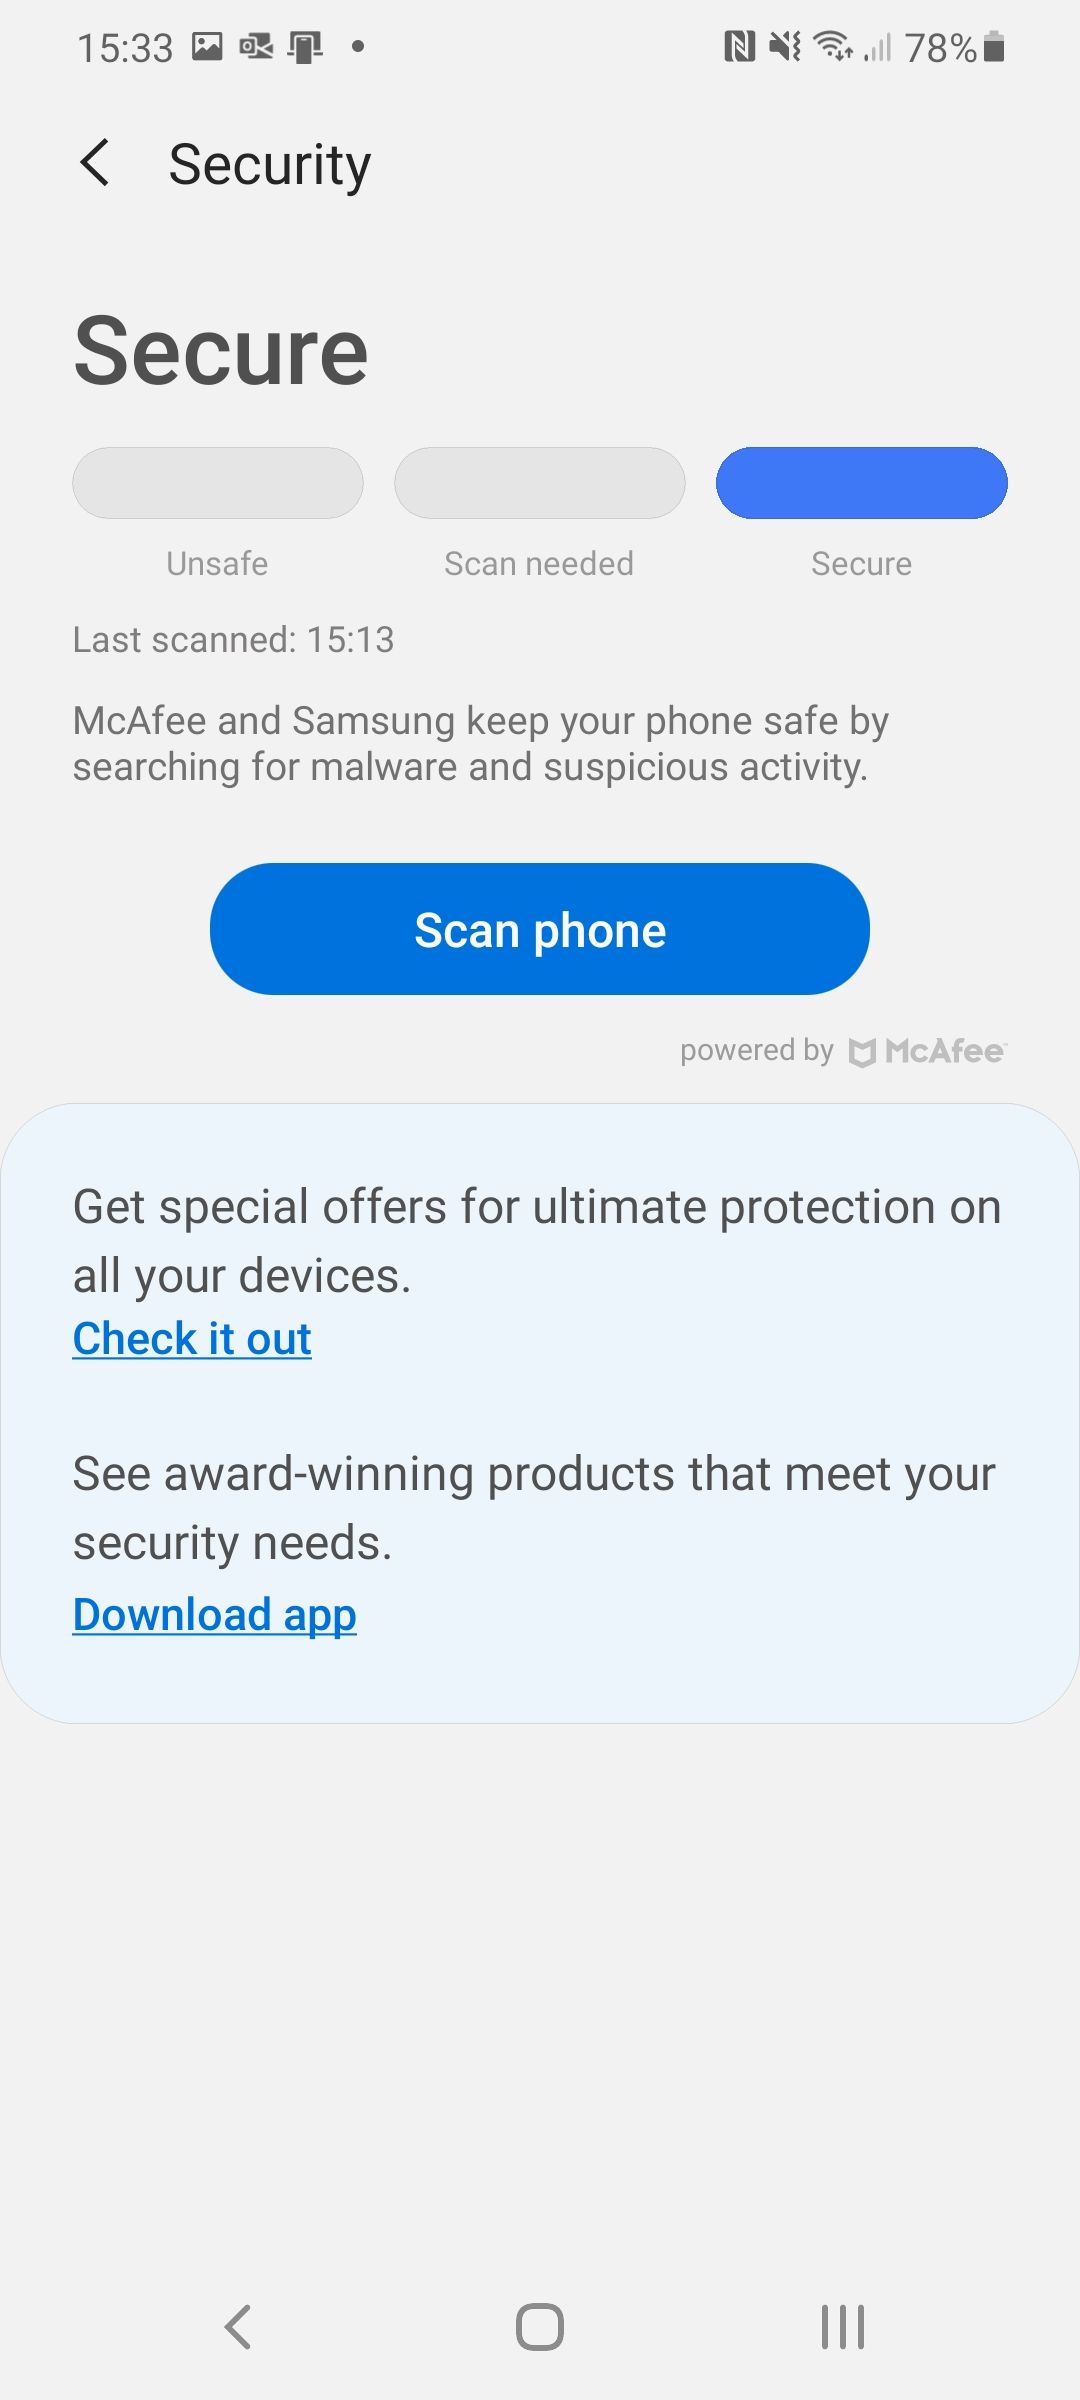 Samsung Galaxy S20 series to come with anti-malware protection from McAfee